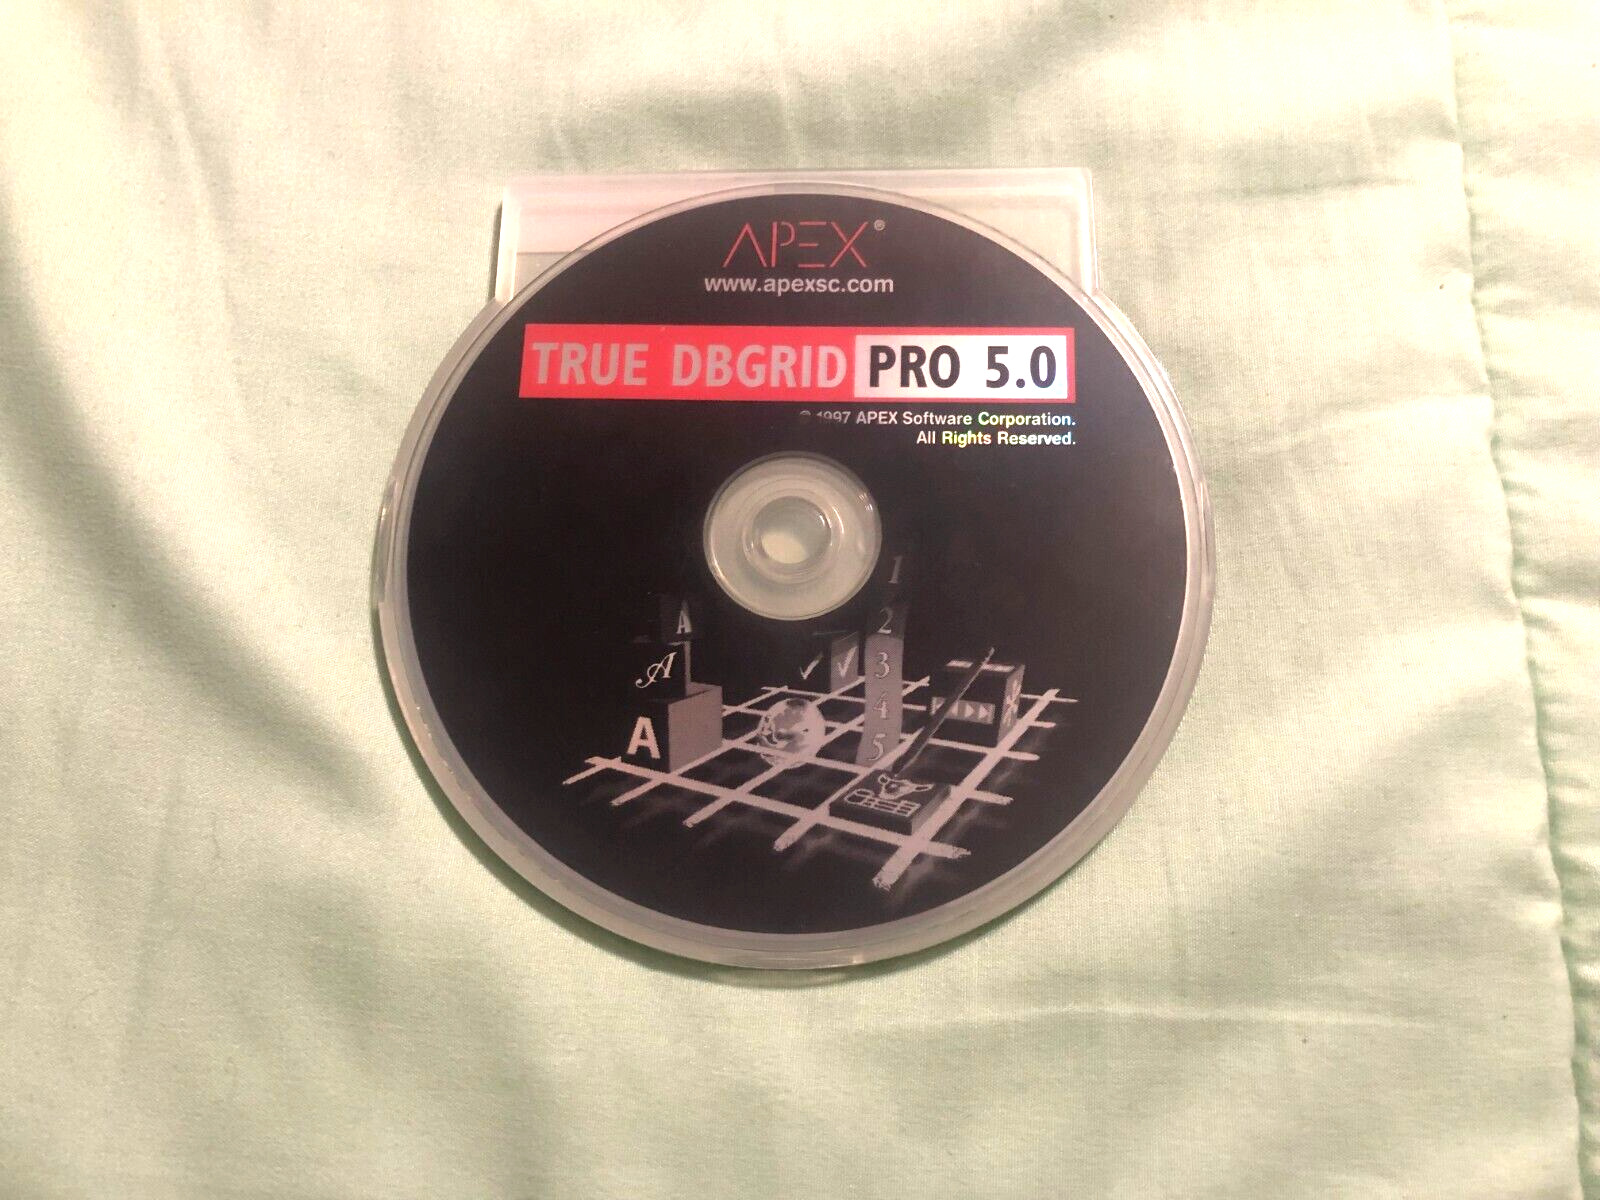 APEX True DBGRID PRO 5.0 Data Visualization and Editing Software CD